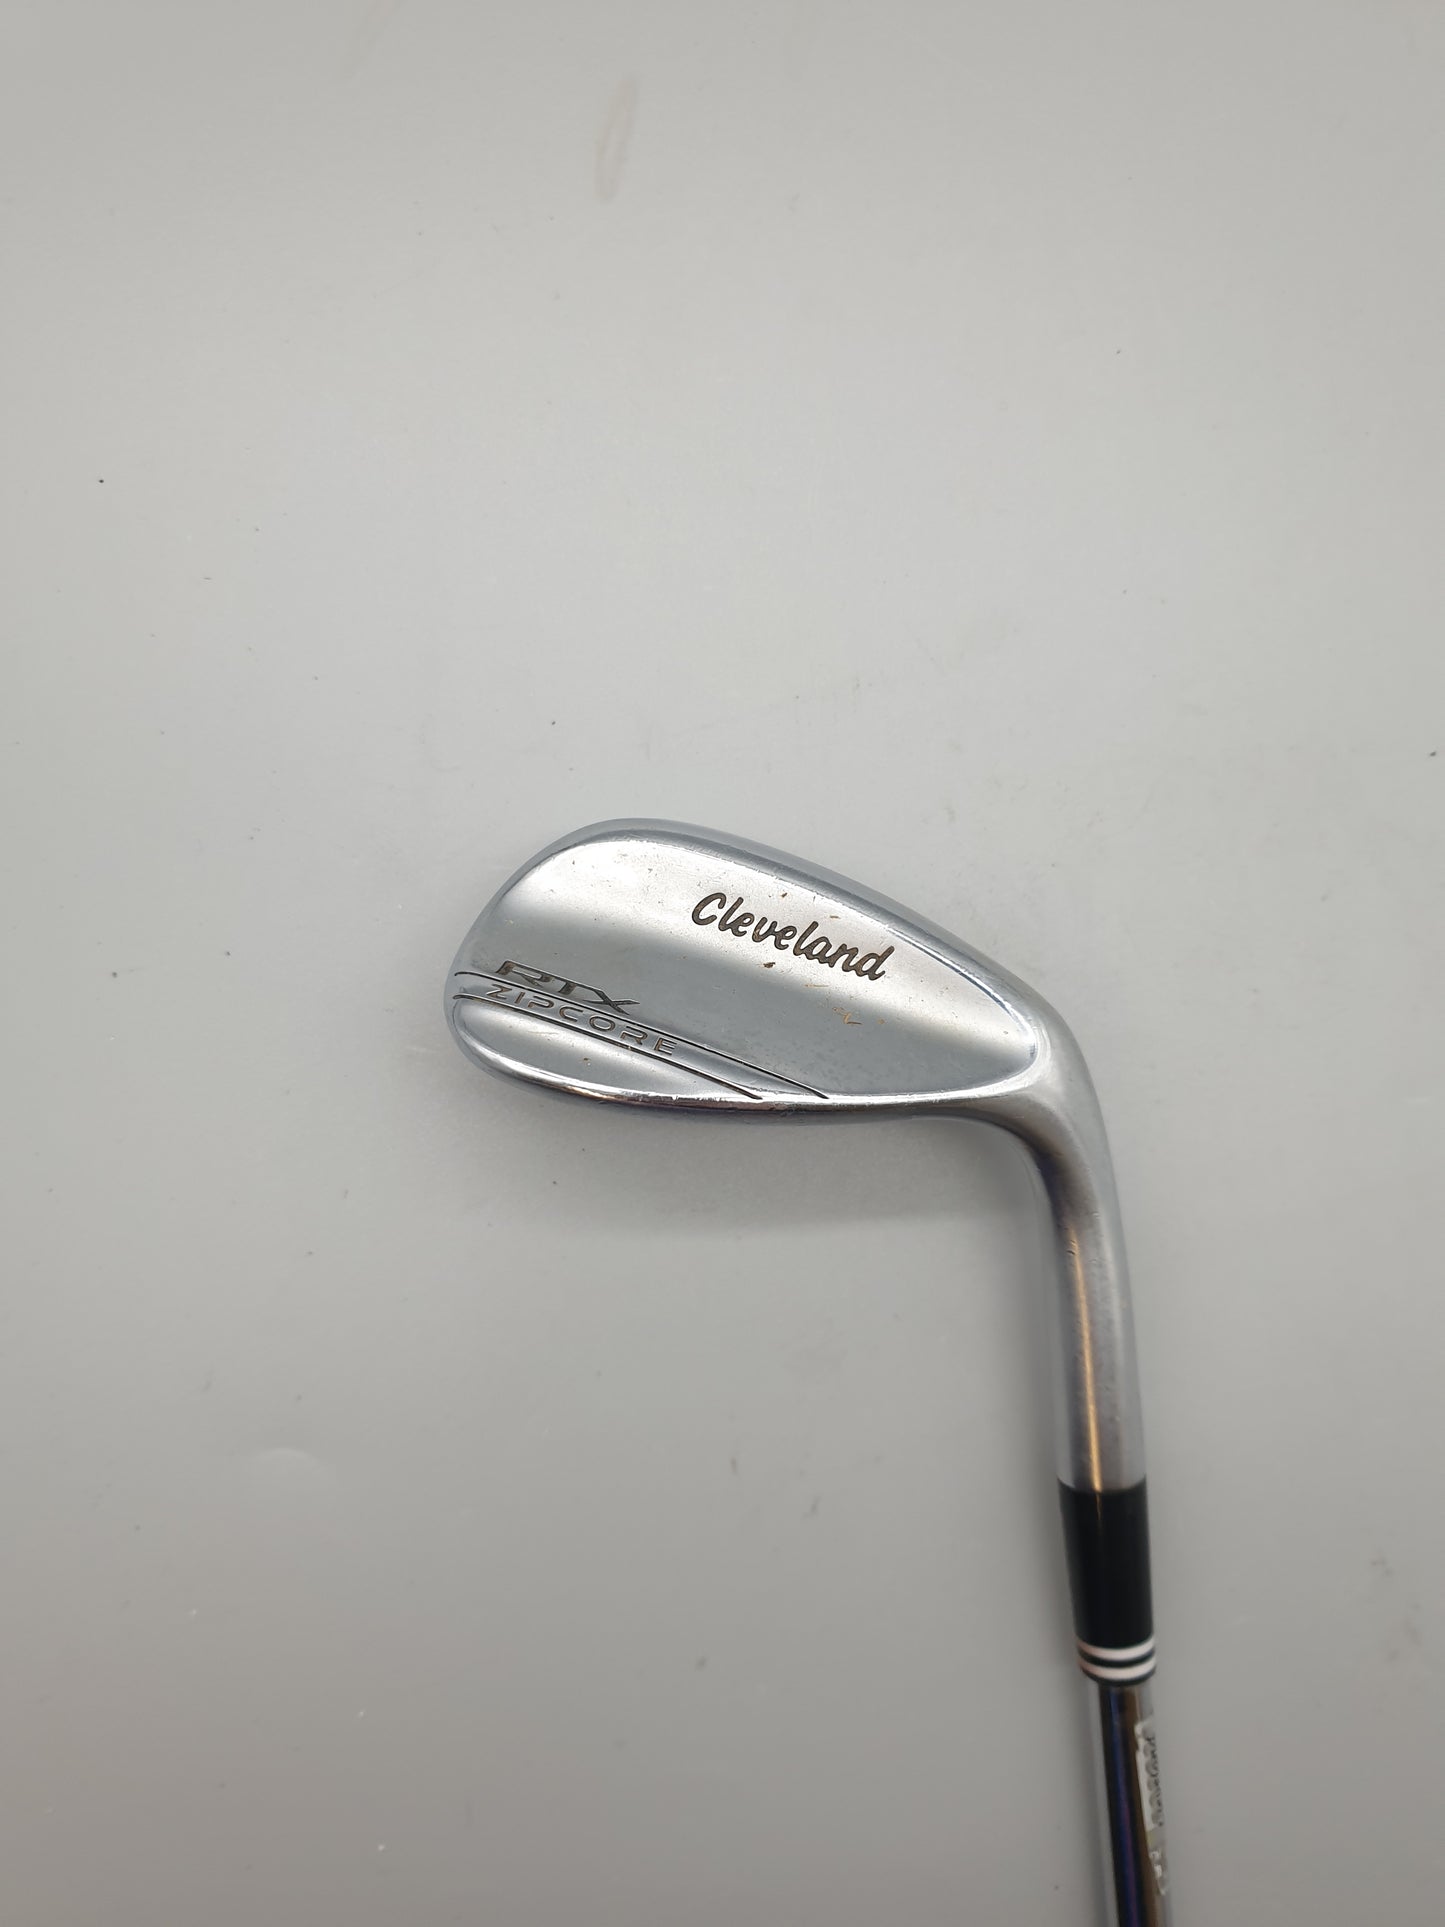 Clevland RTX Zipcore 58.12 Full Dynamic Gold Right Hand - Used